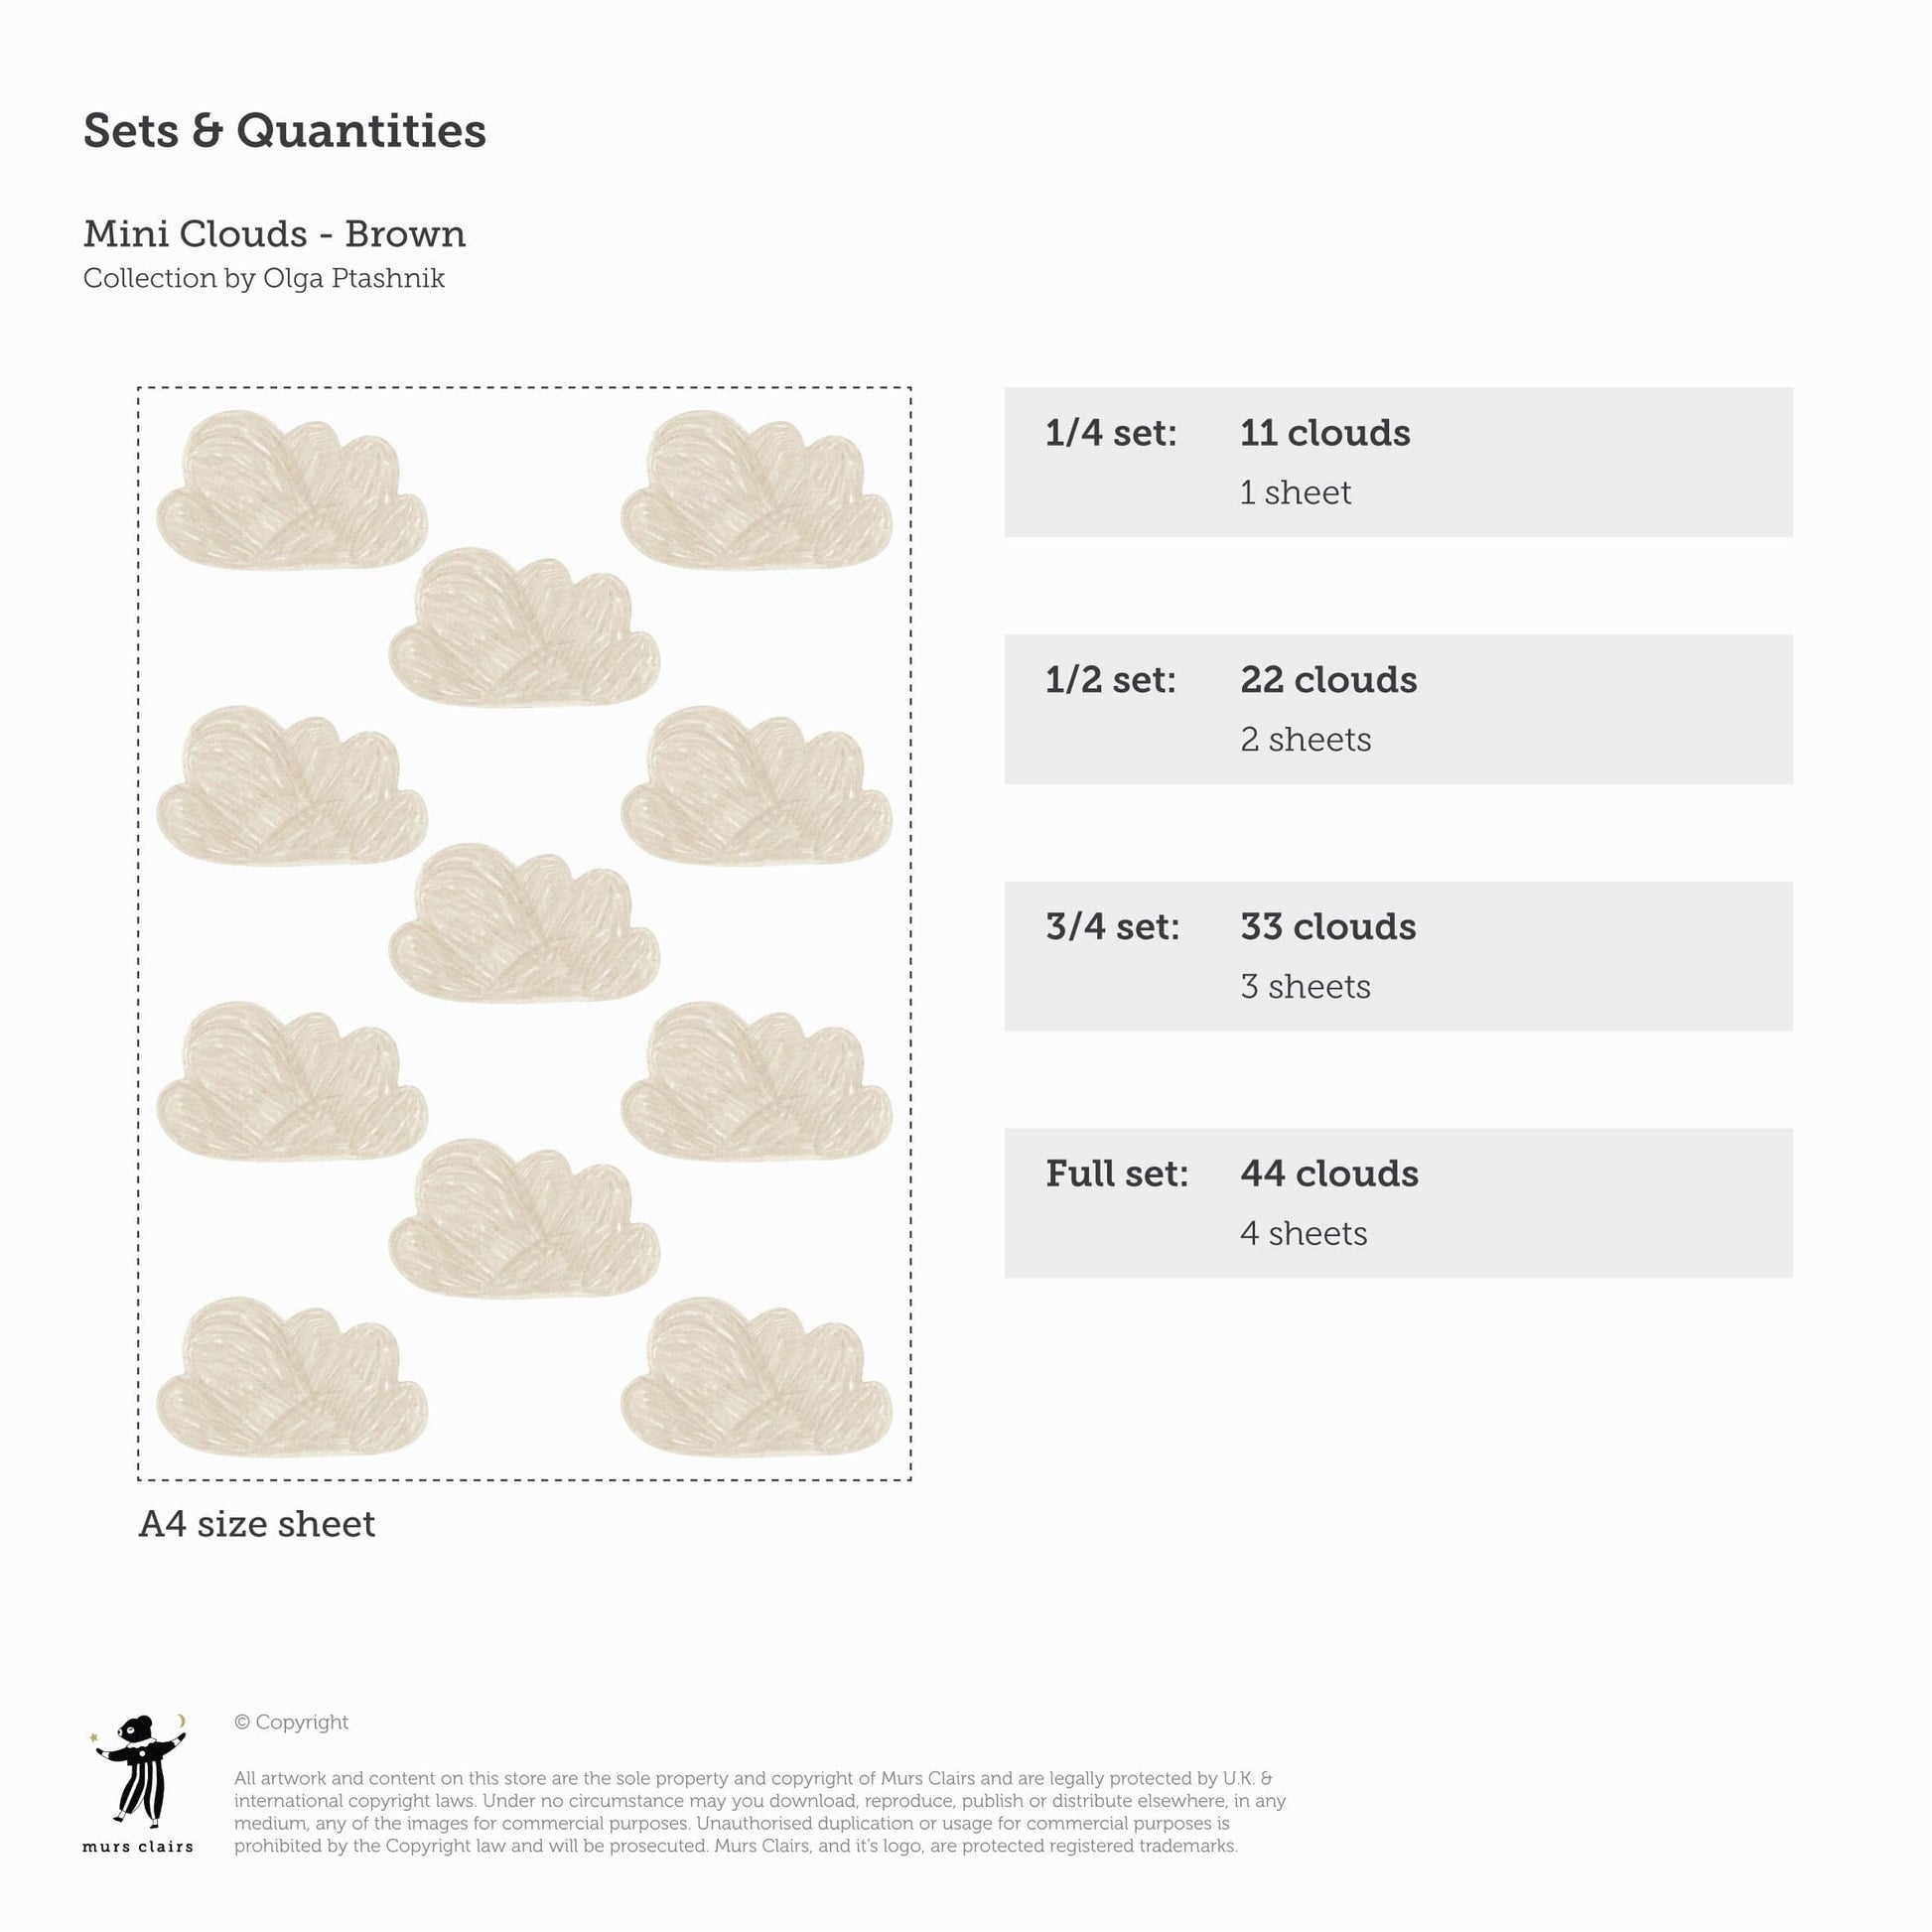 Image showing 1 full A4 sheet of cloud stickers and how many is on each sheet. Each sheet has 11 cloud stickers.